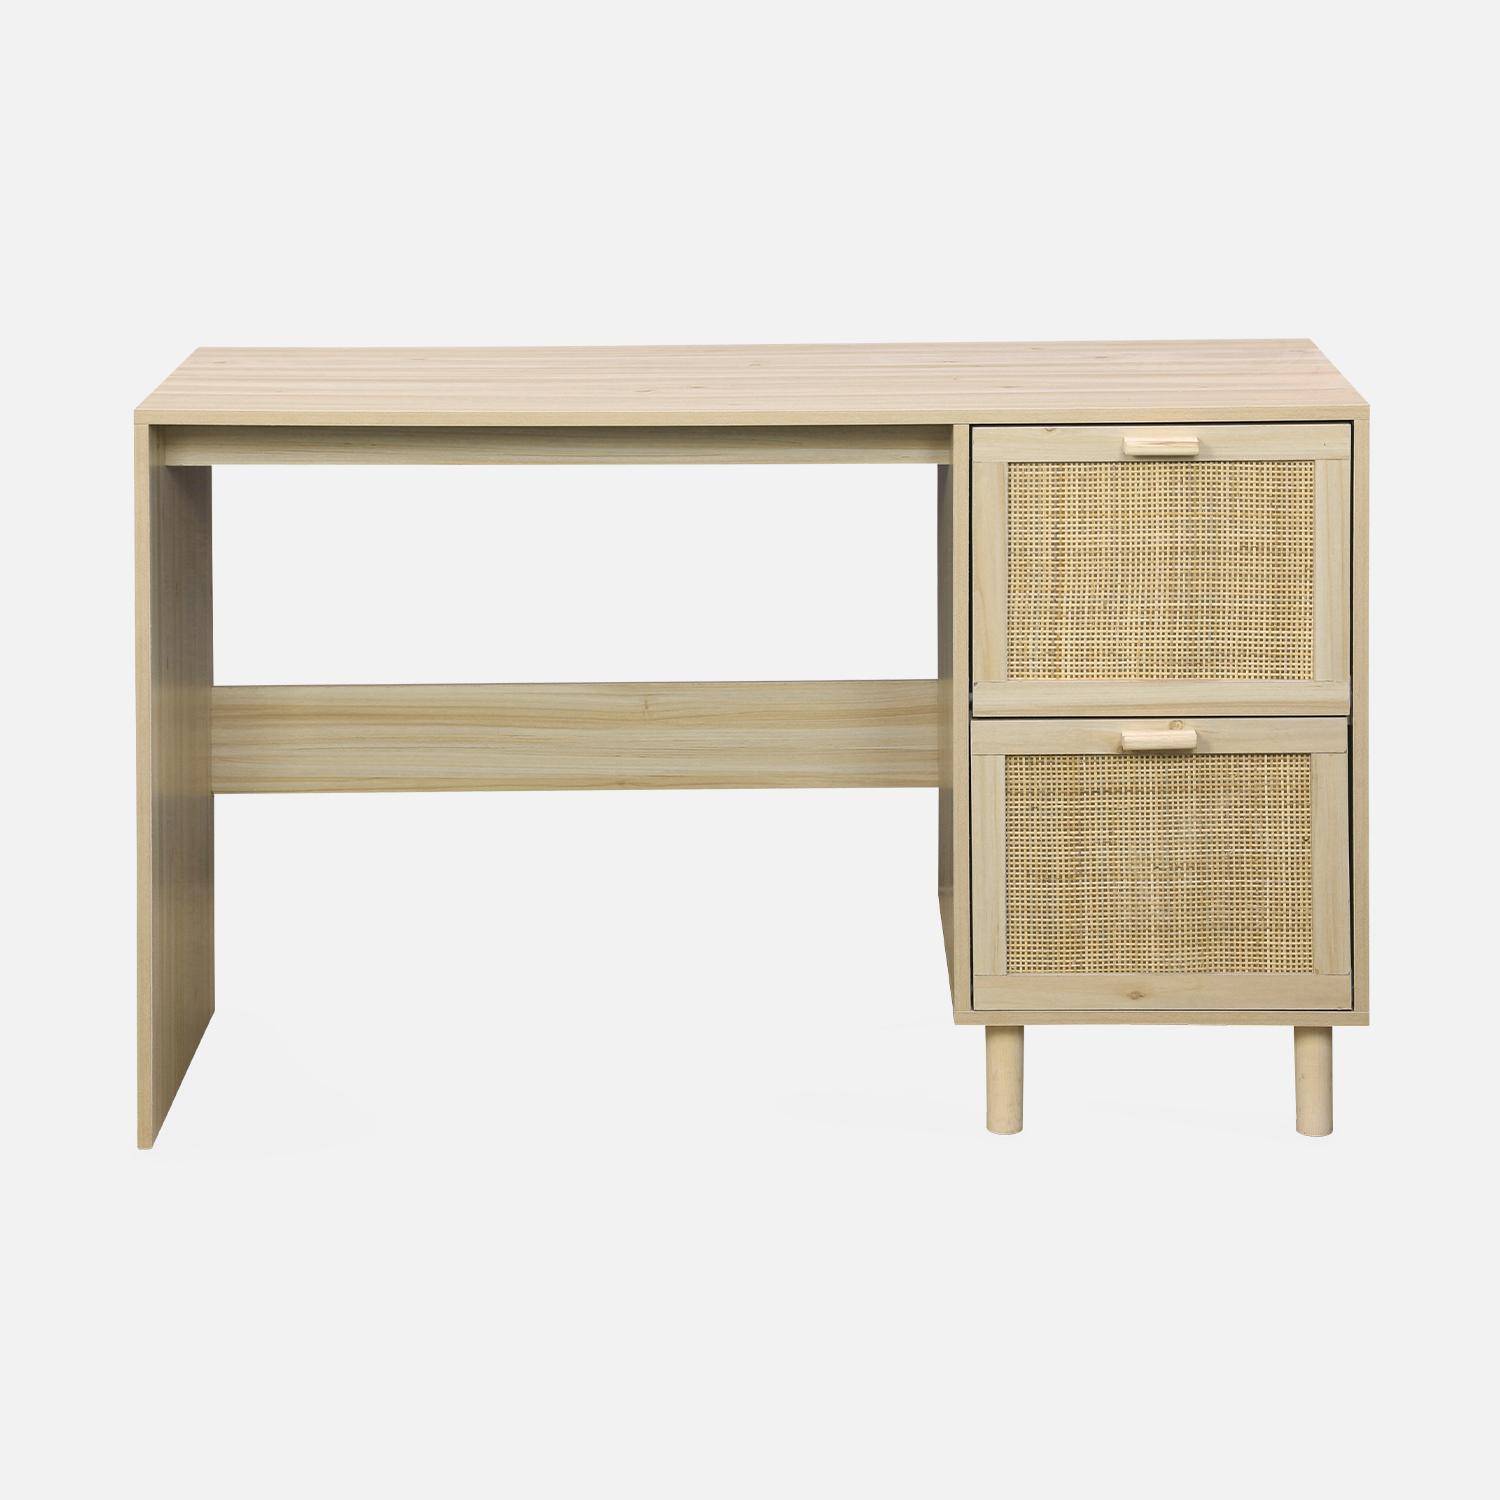 Woven rattan desk with 2 drawers, 120x48x75cm - Camargue - Natural Photo4